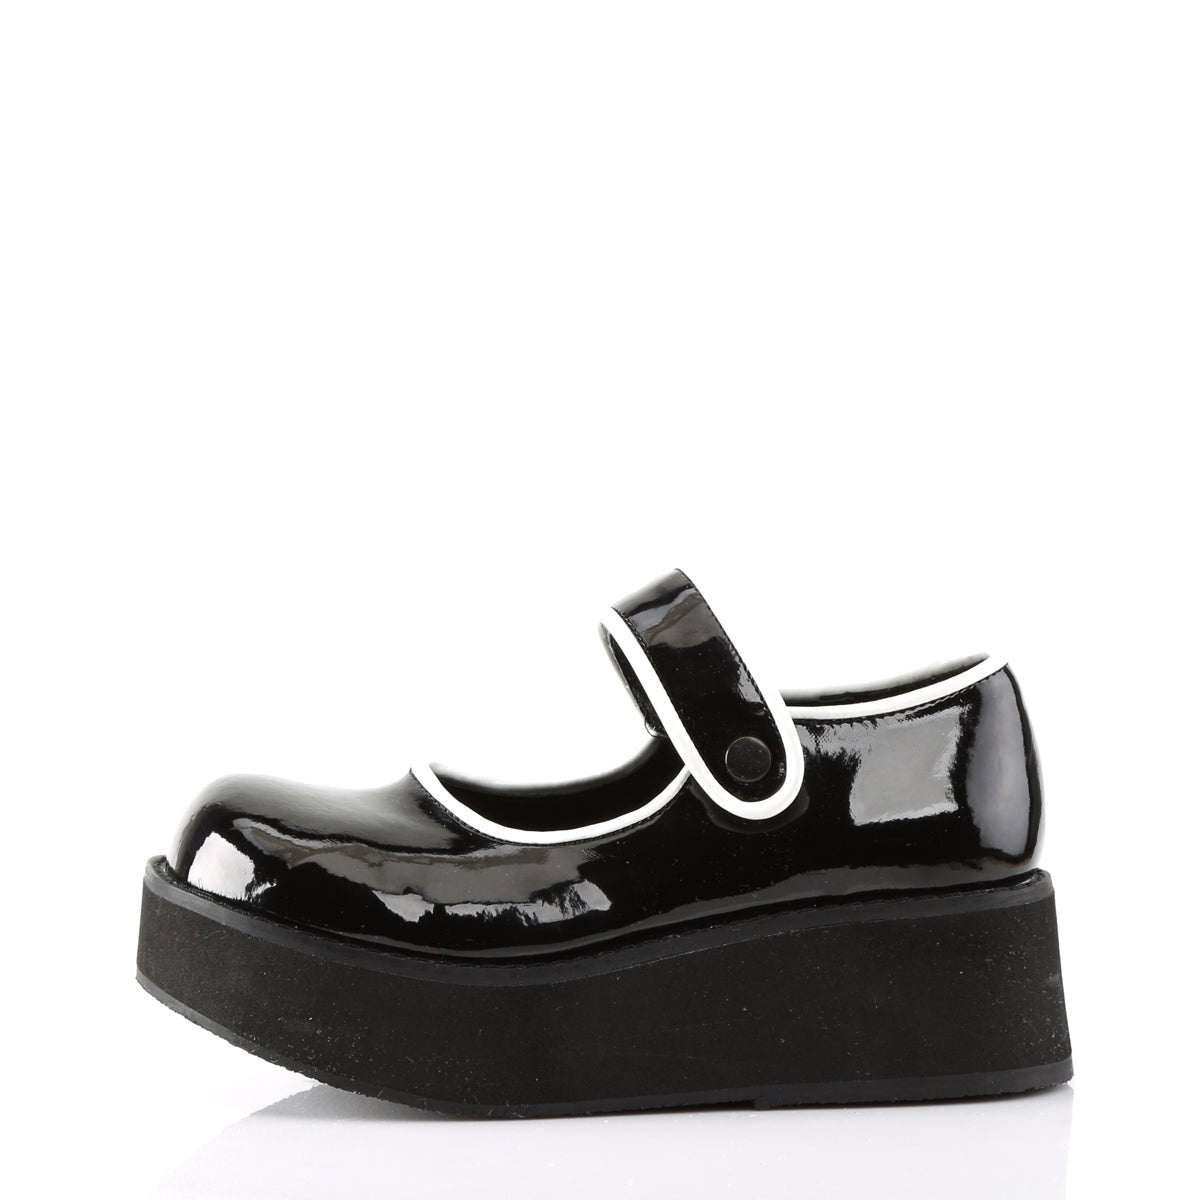 Too Fast | Demonia Sprite 01 | Black Patent Leather Women&#39;s Mary Janes